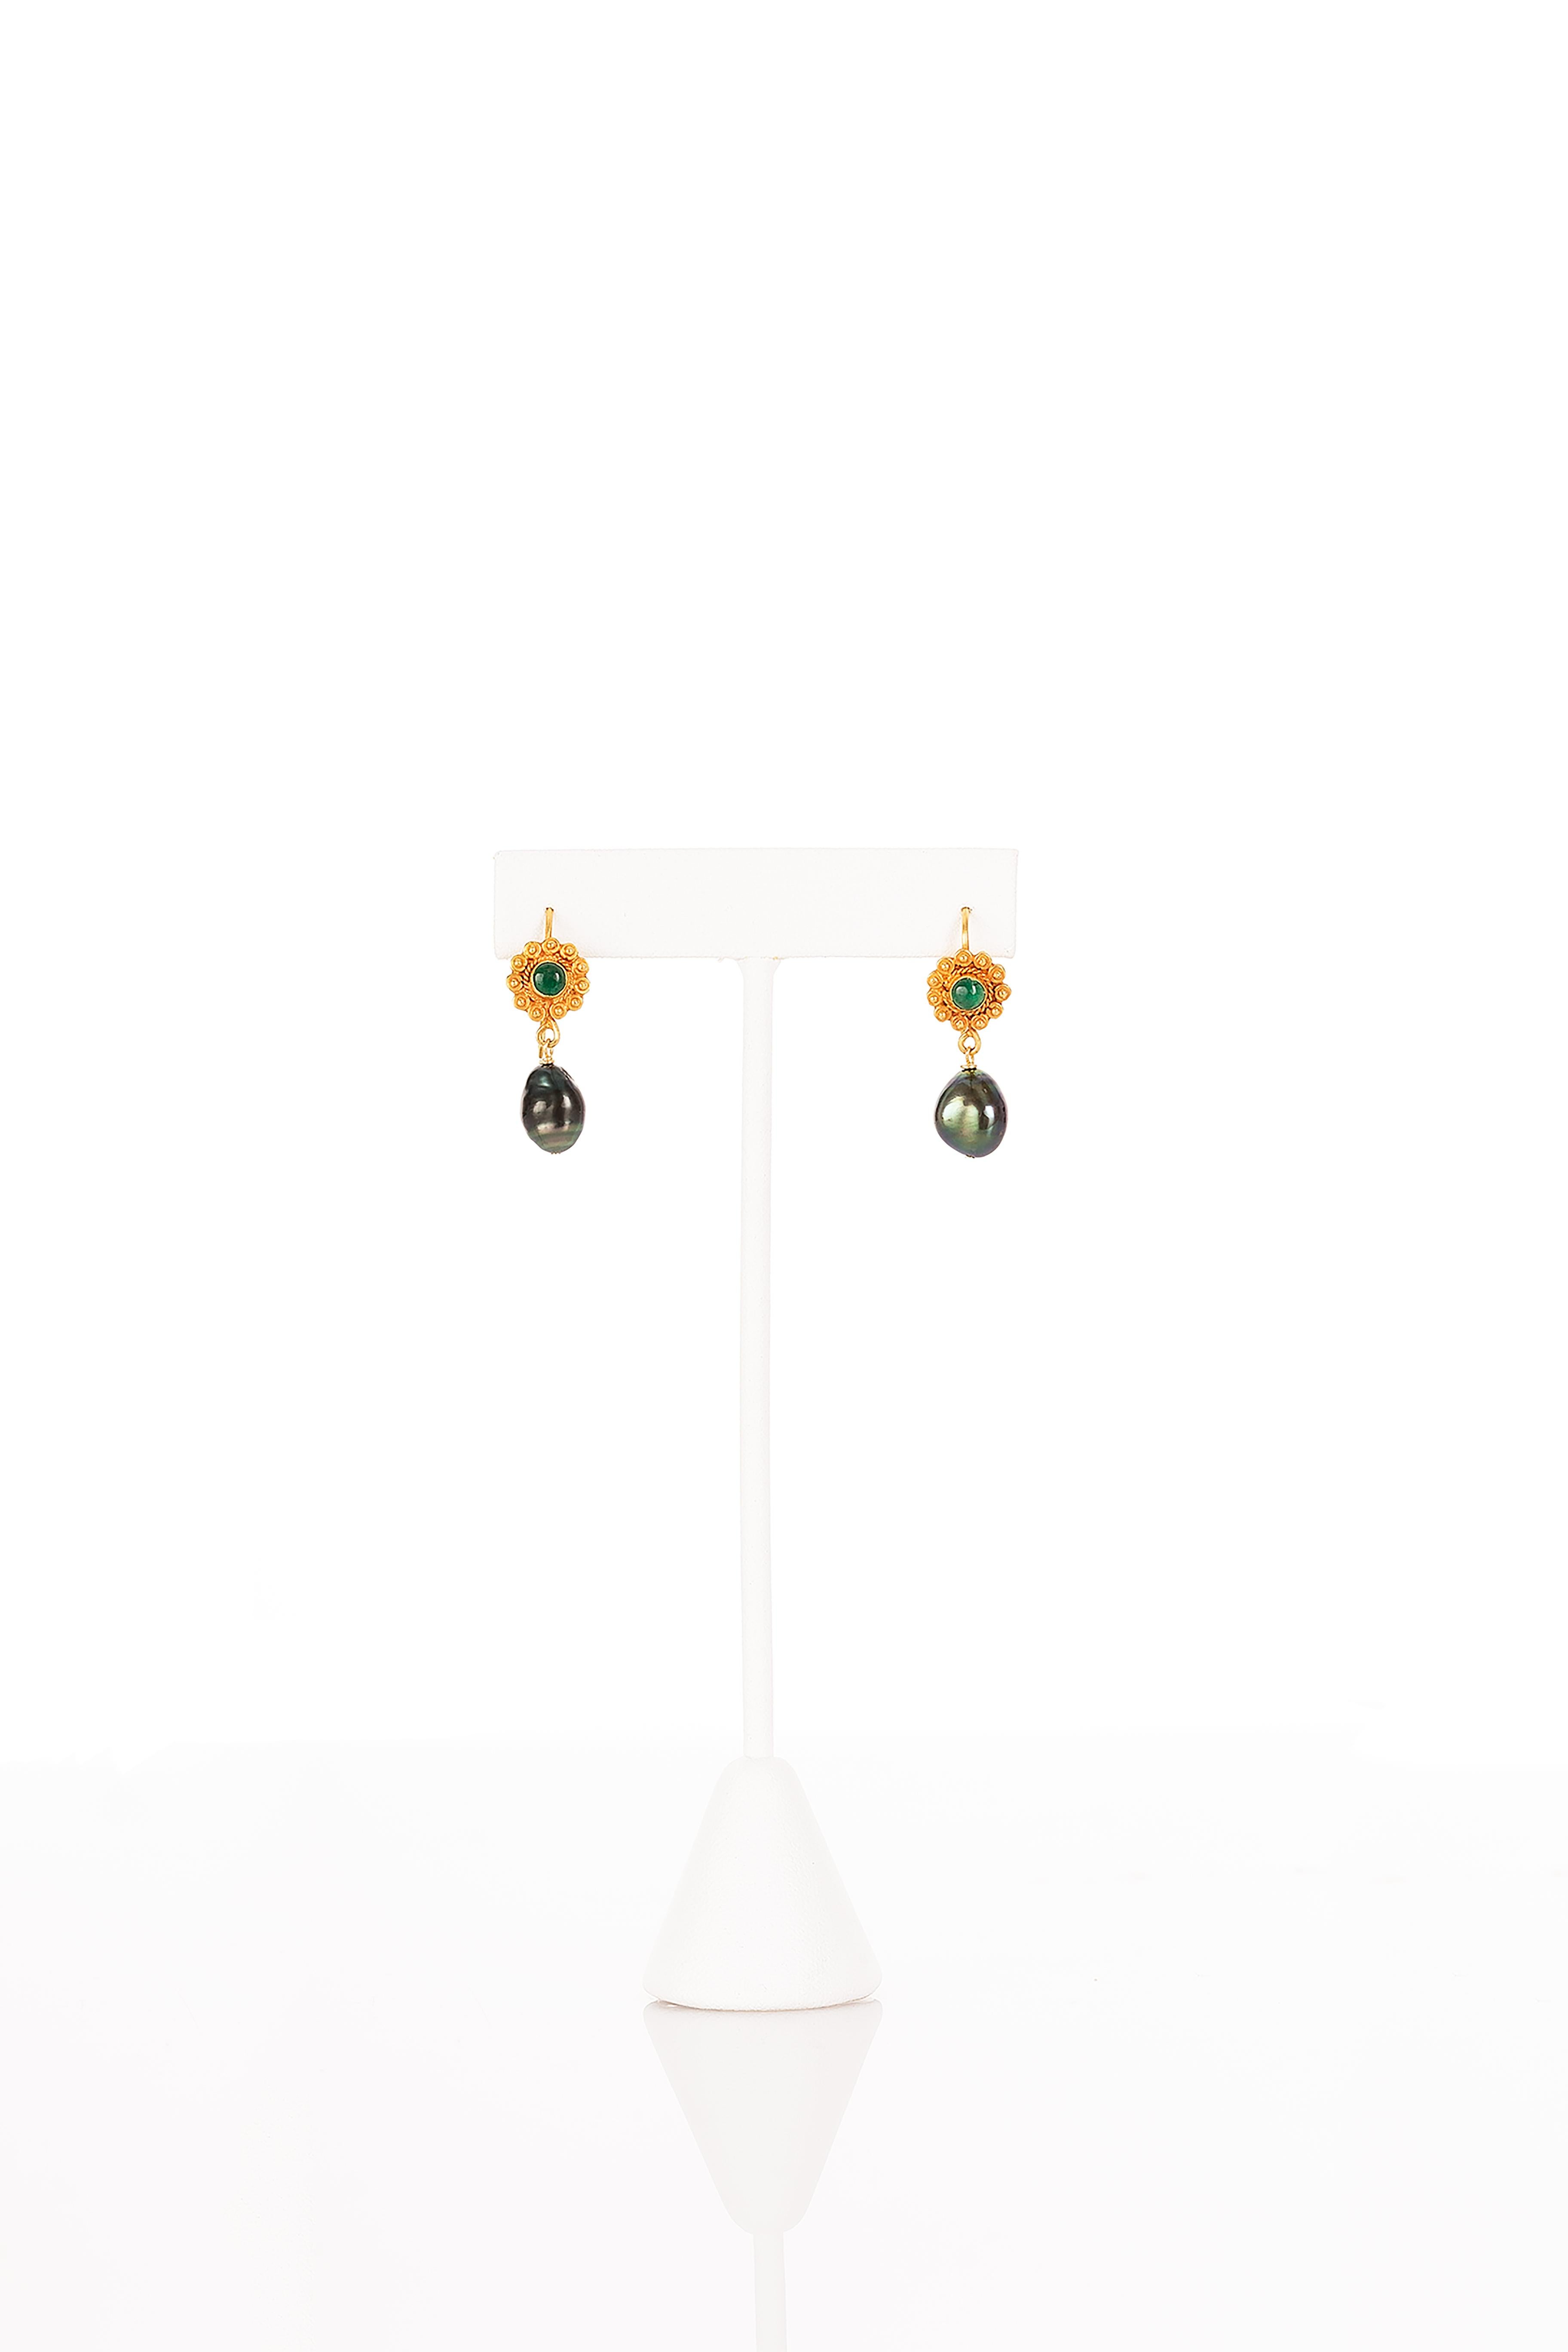 Emerald and Tahitian Keshi Pearl 18K Gold Drop Earrings   In New Condition For Sale In Pacific Palisades, CA